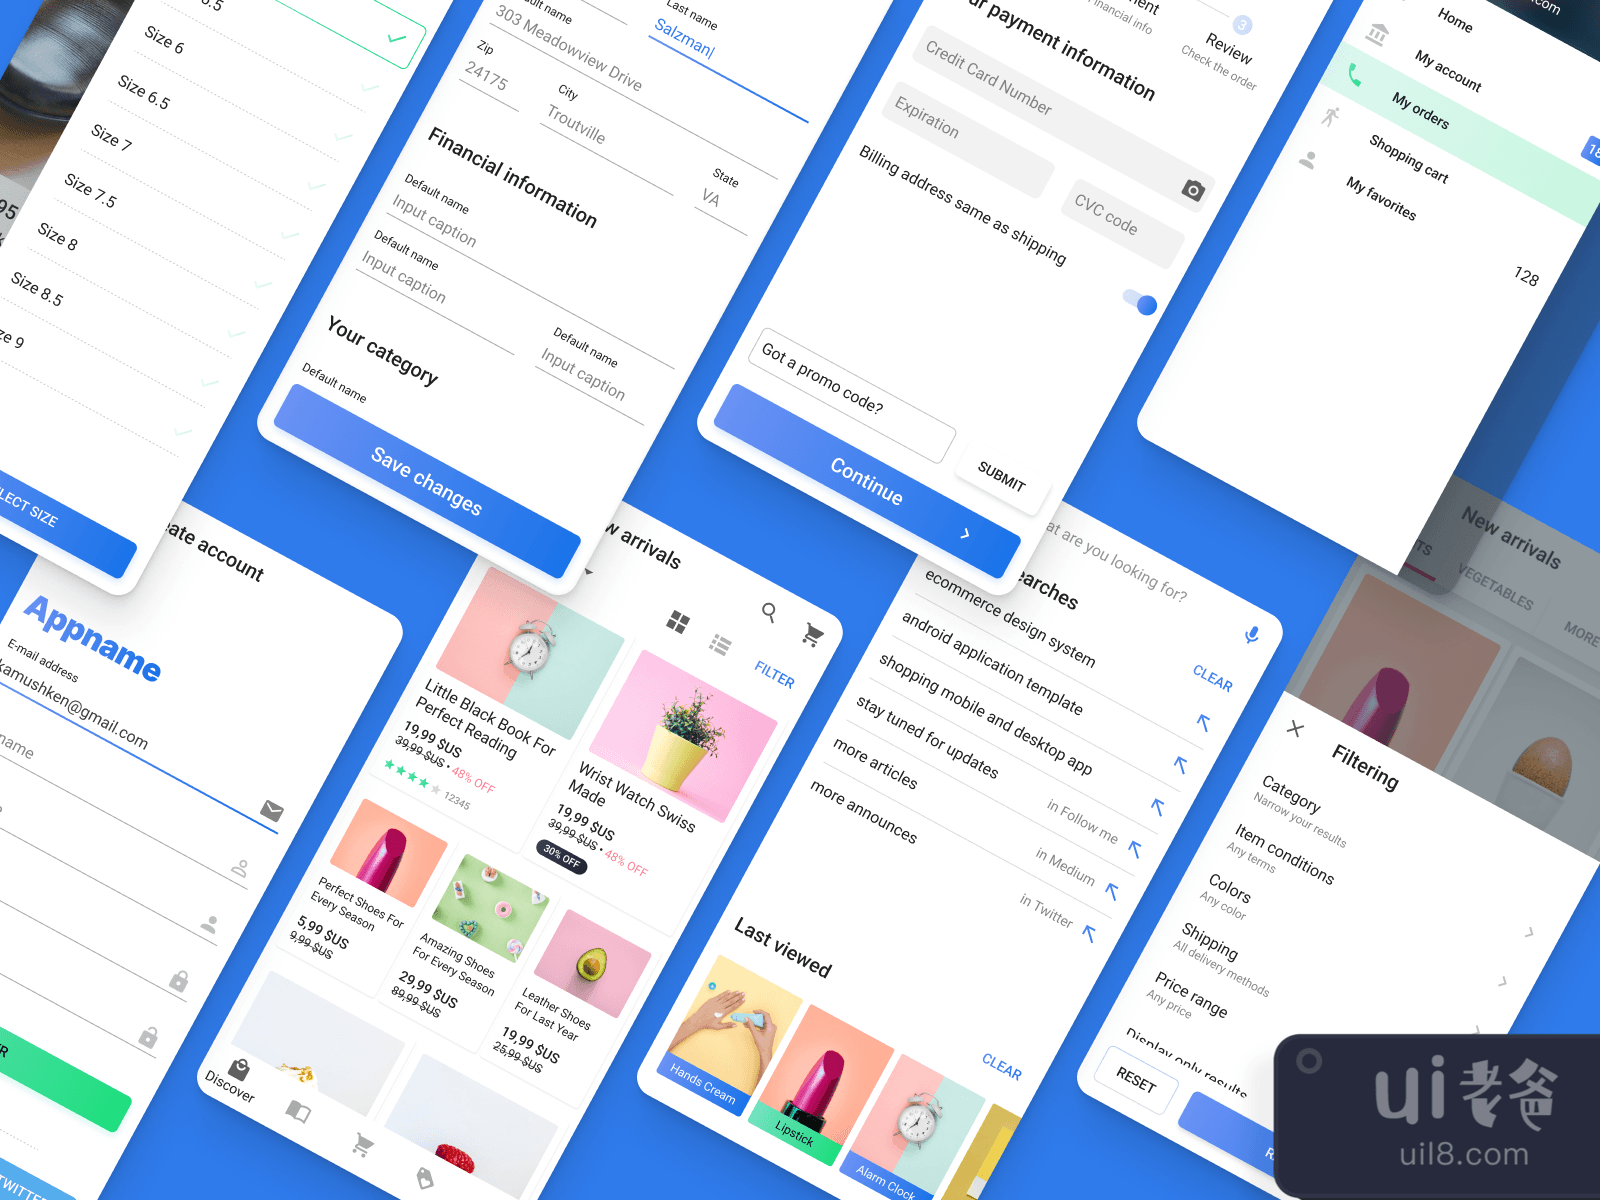 Android UI Kit for Figma and Adobe XD No 4